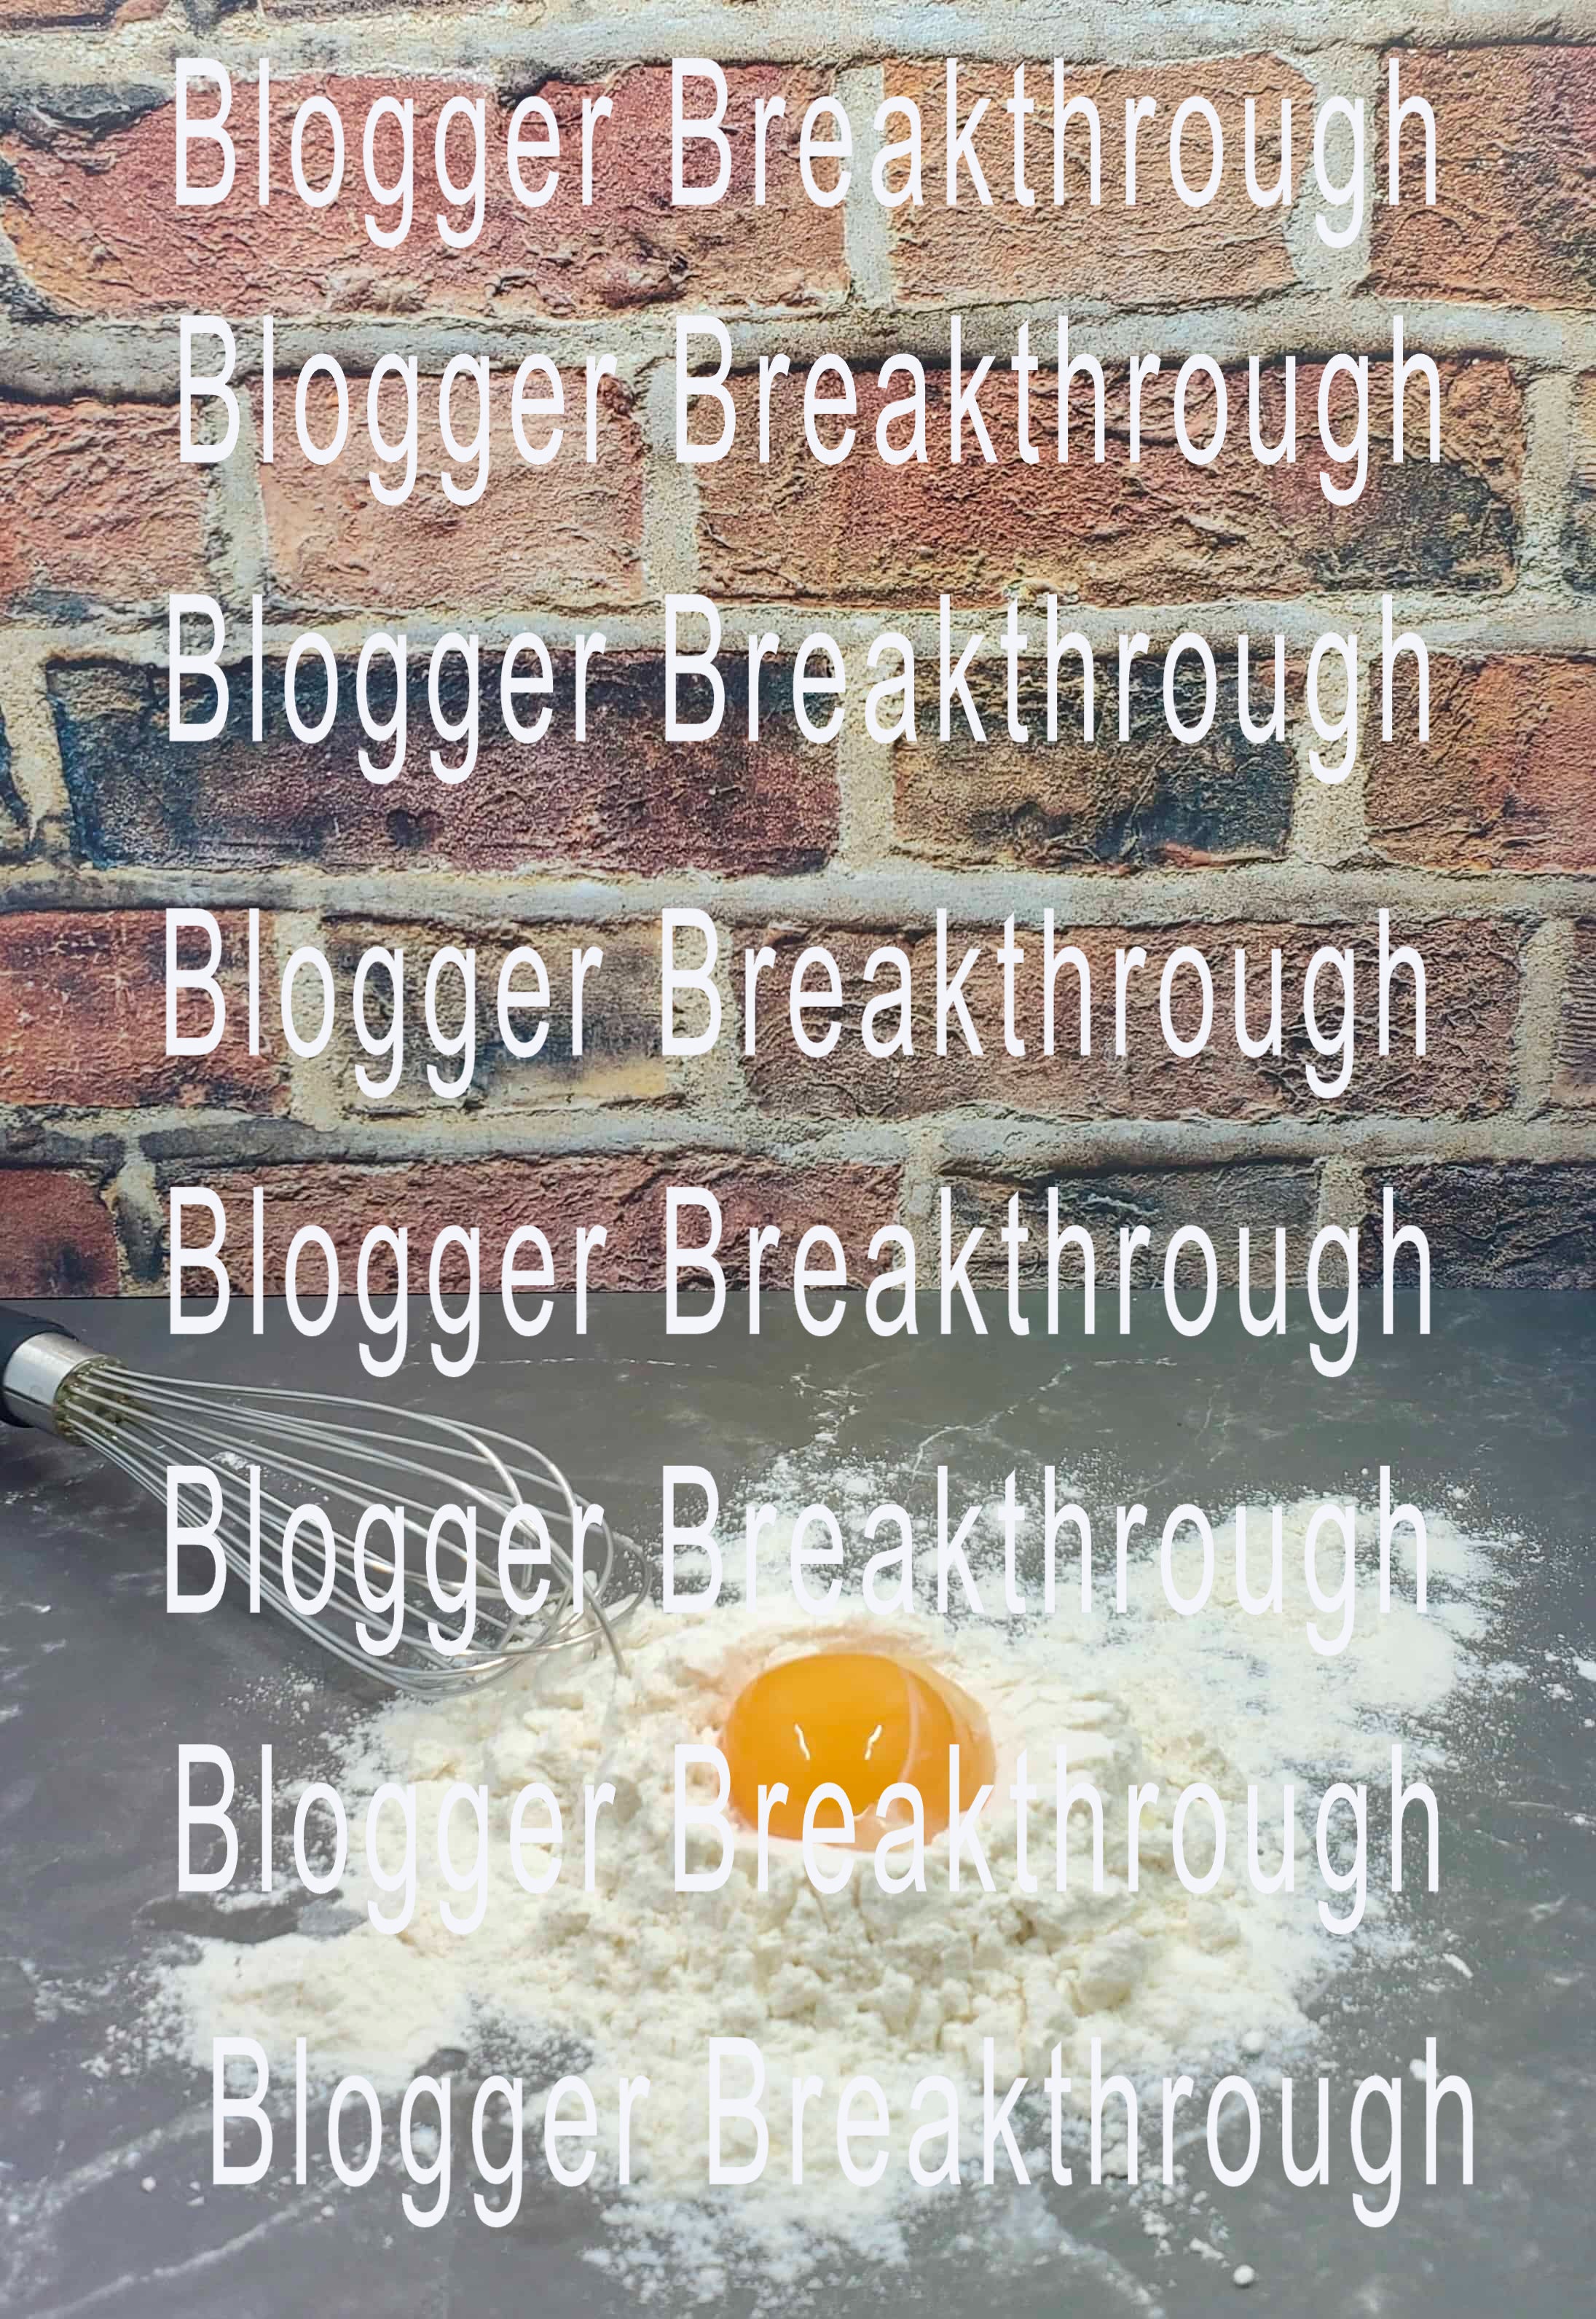 Blogger through Blogger Breakthrough Summit, Food, Cooking, and Gardening Themed Stock Photos.